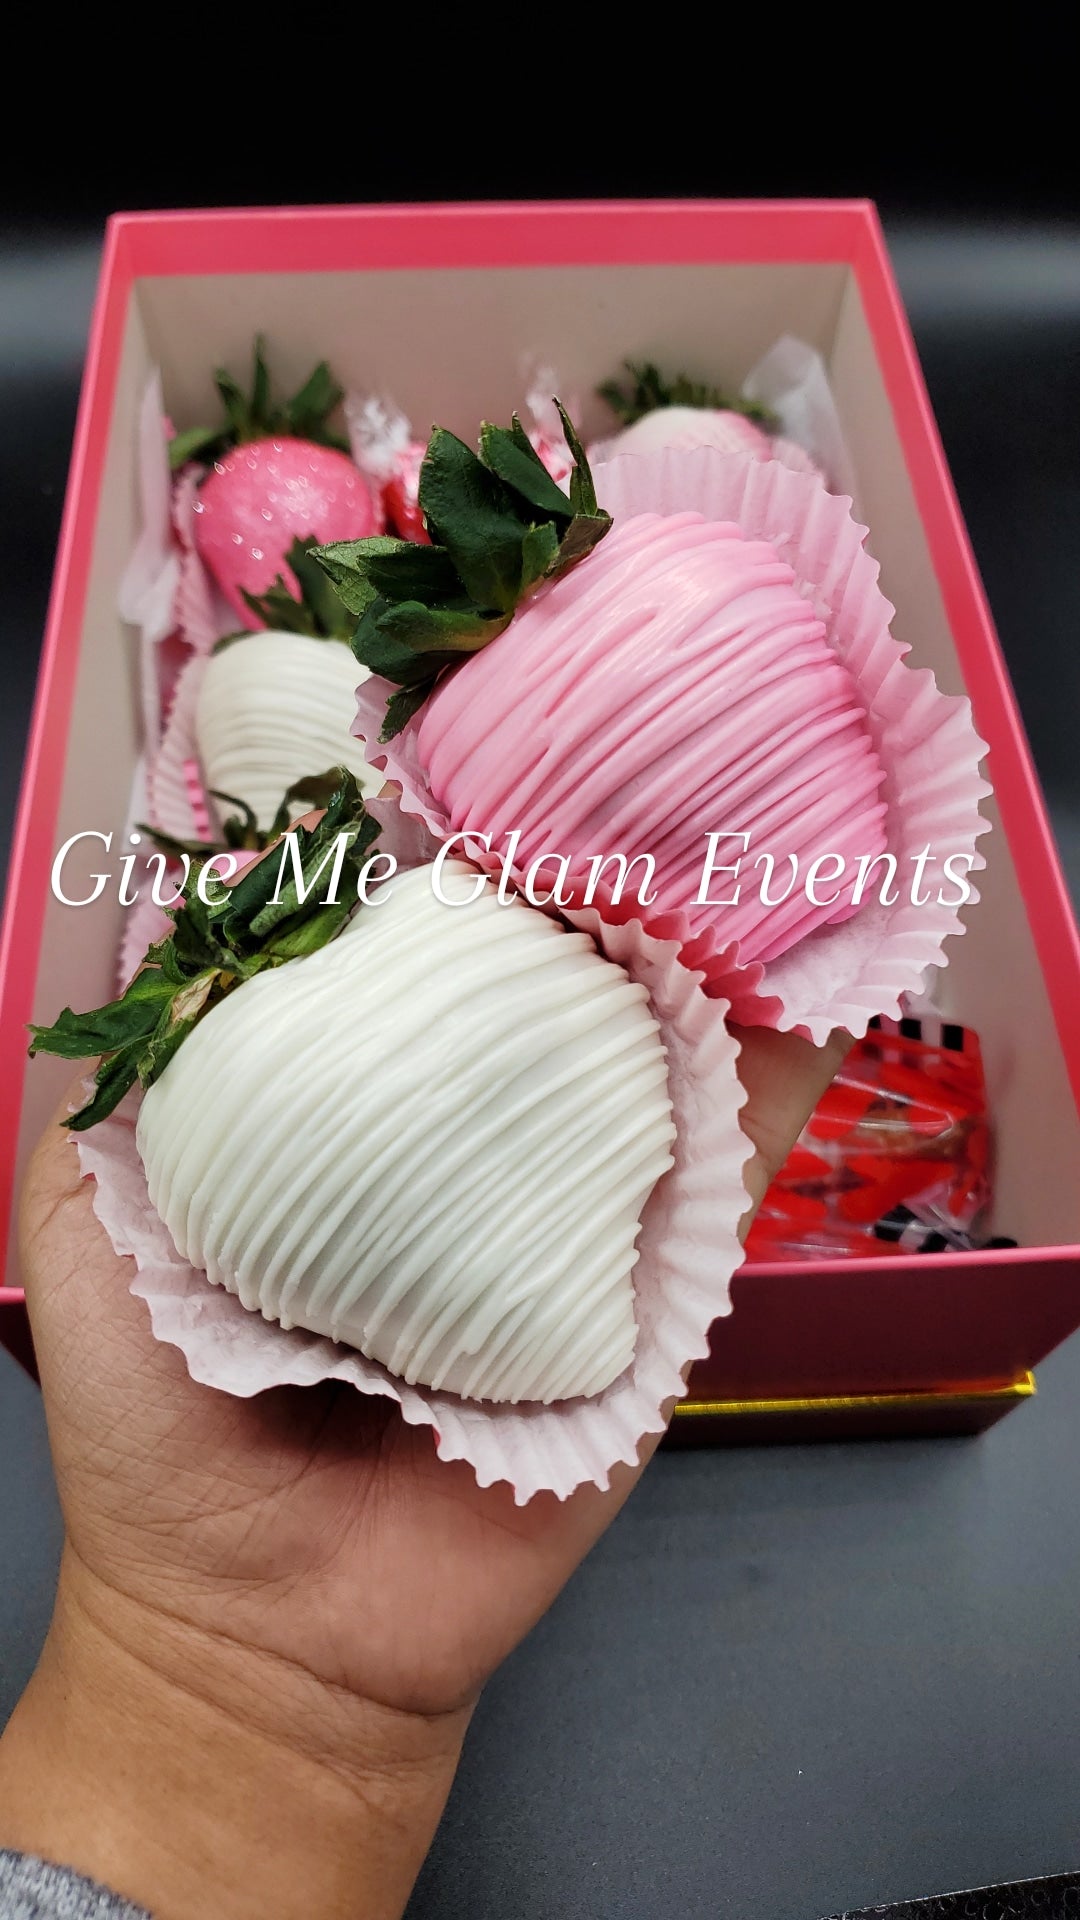 Valentine Small Barefoot Bubbly & Chocolate Covered Strawberry Gift Boxes (LOCAL PICKUP ONLY)